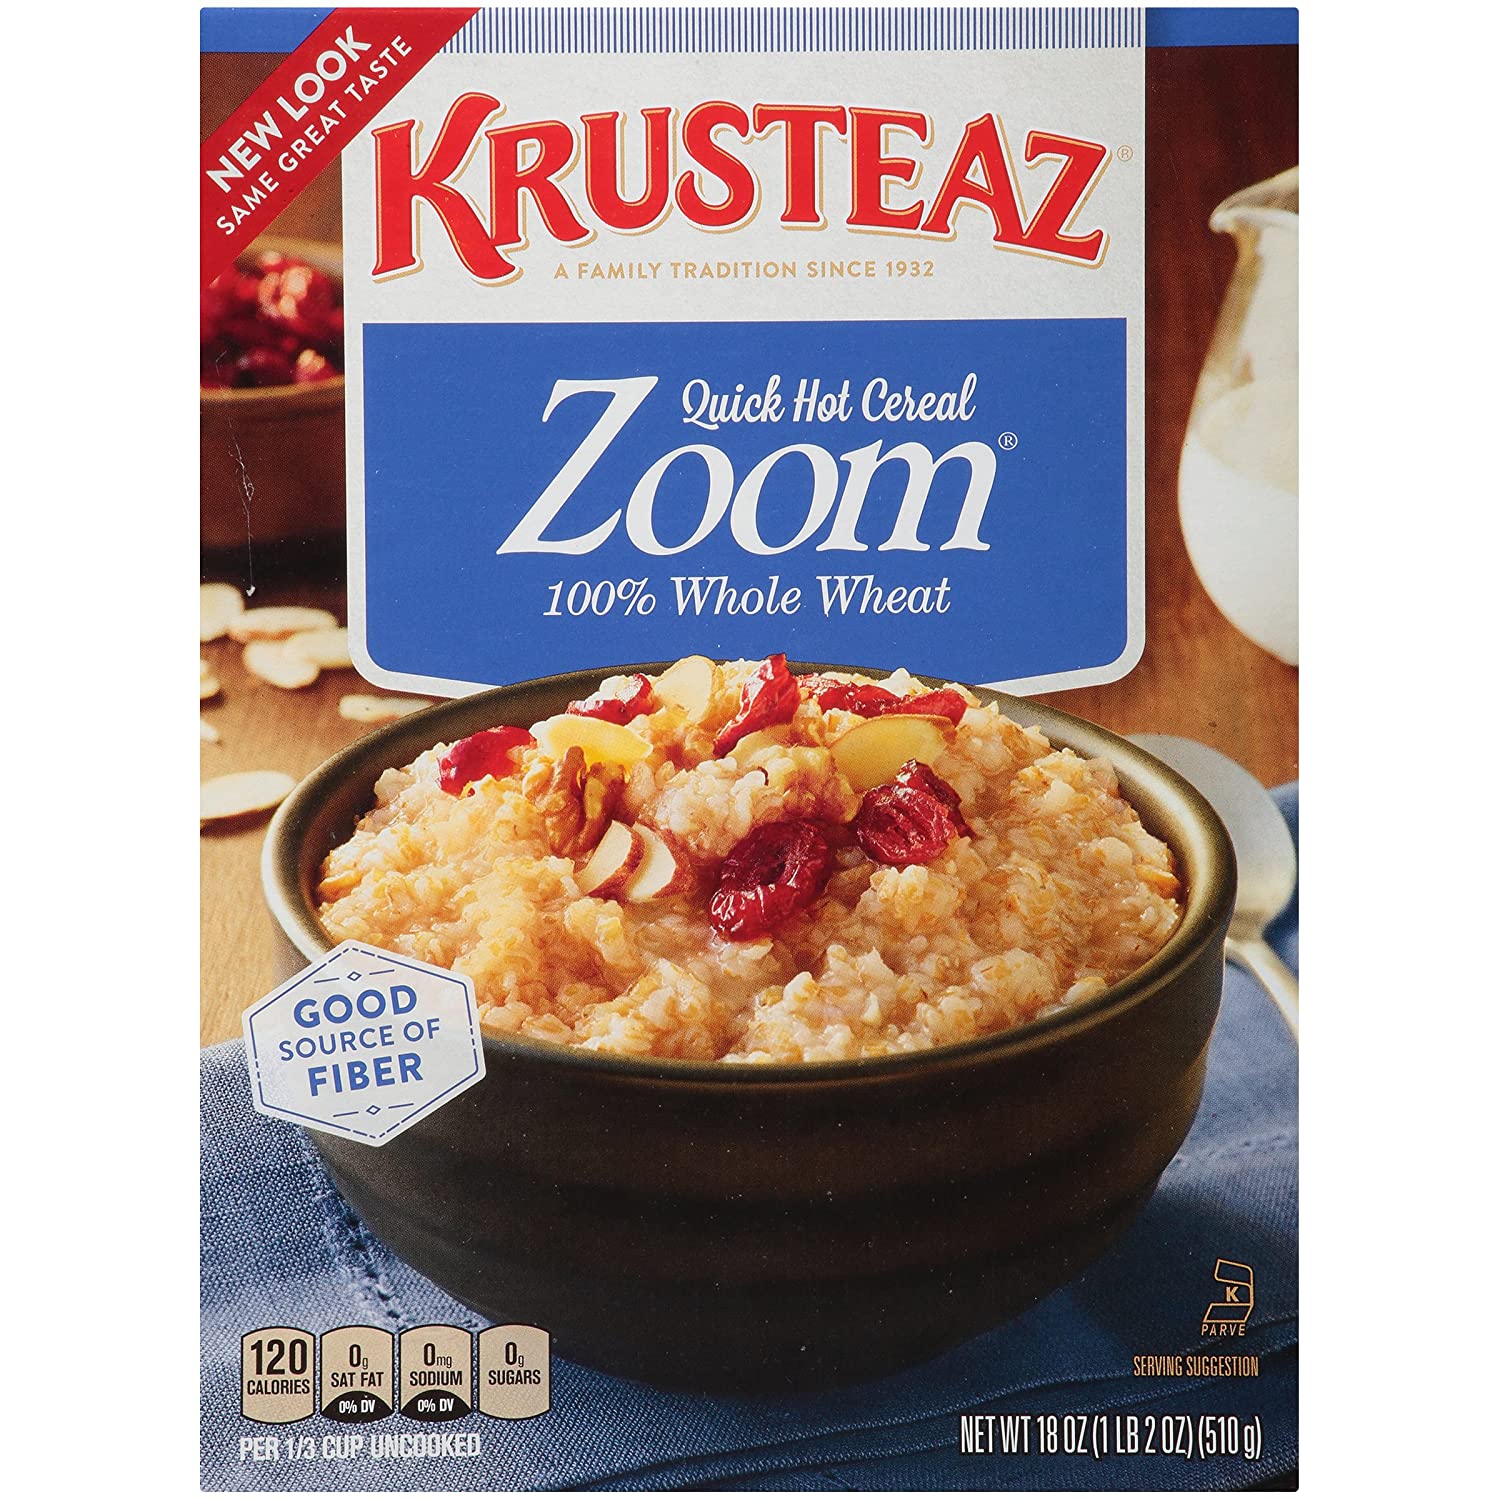 Krusteaz Whole Wheat Zoom Quick Hot Cereal